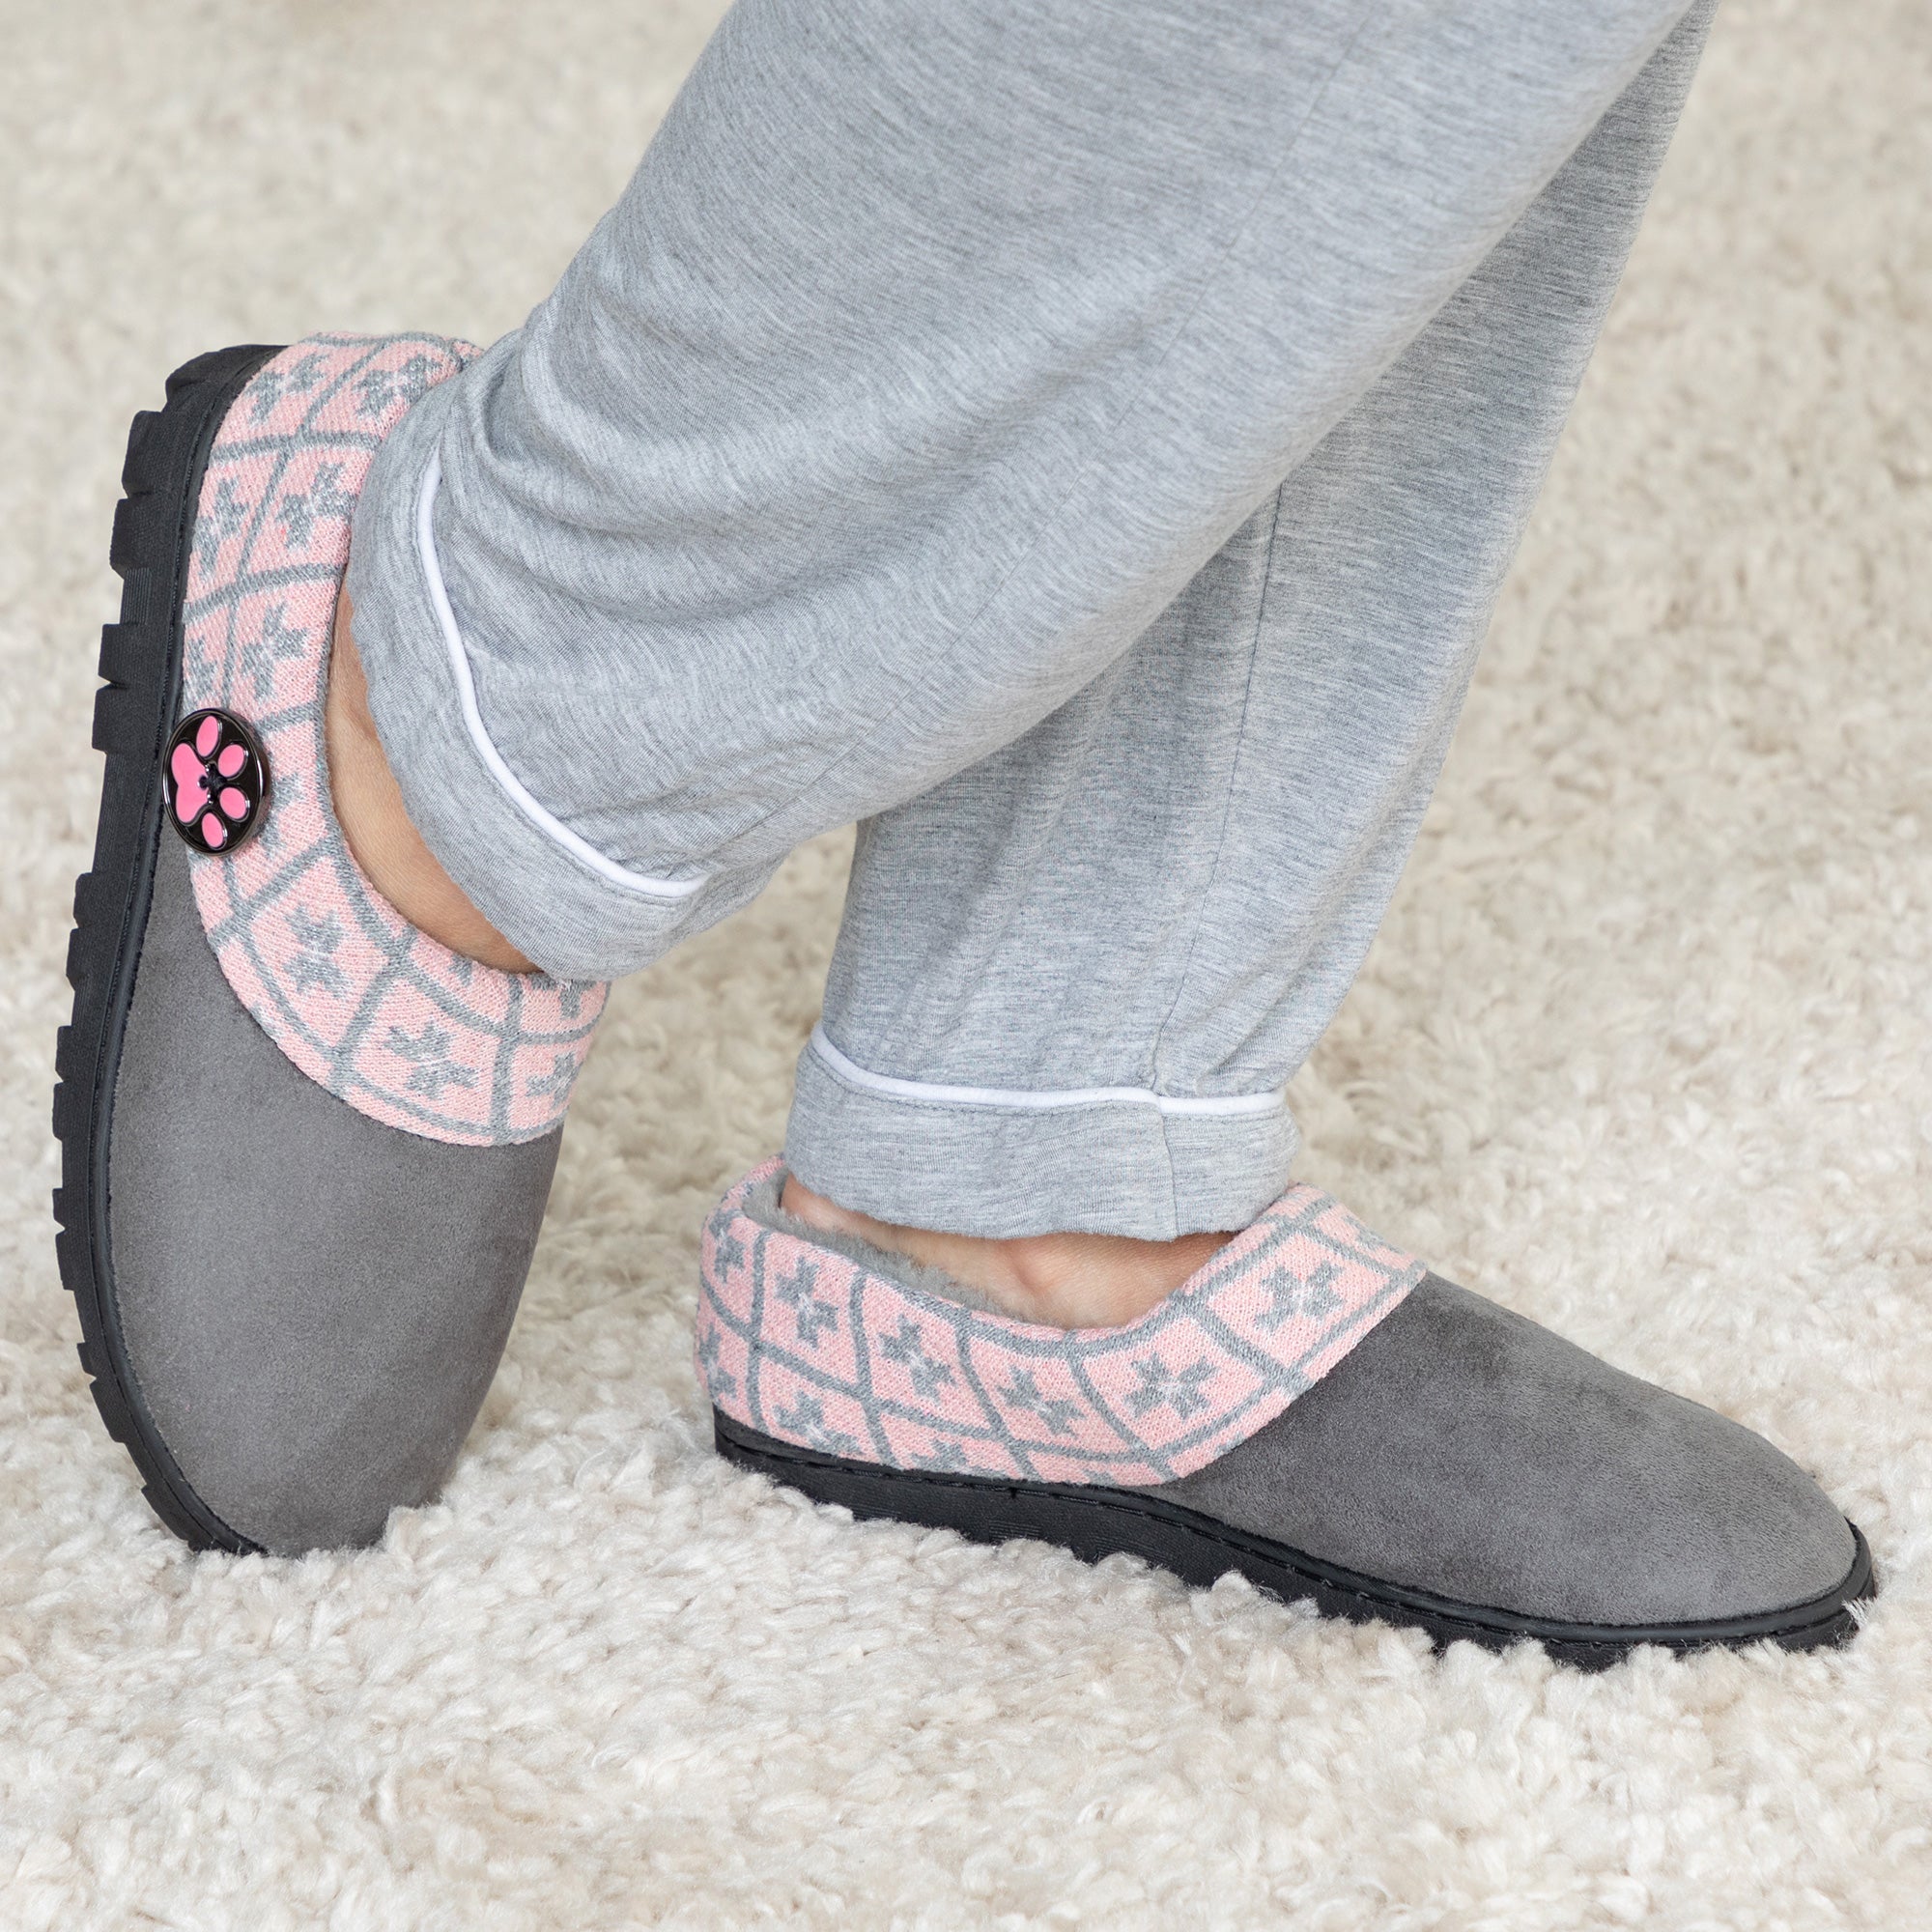 Purple Paw Women's Comfy Clog Slippers - Pink/Gray - 9